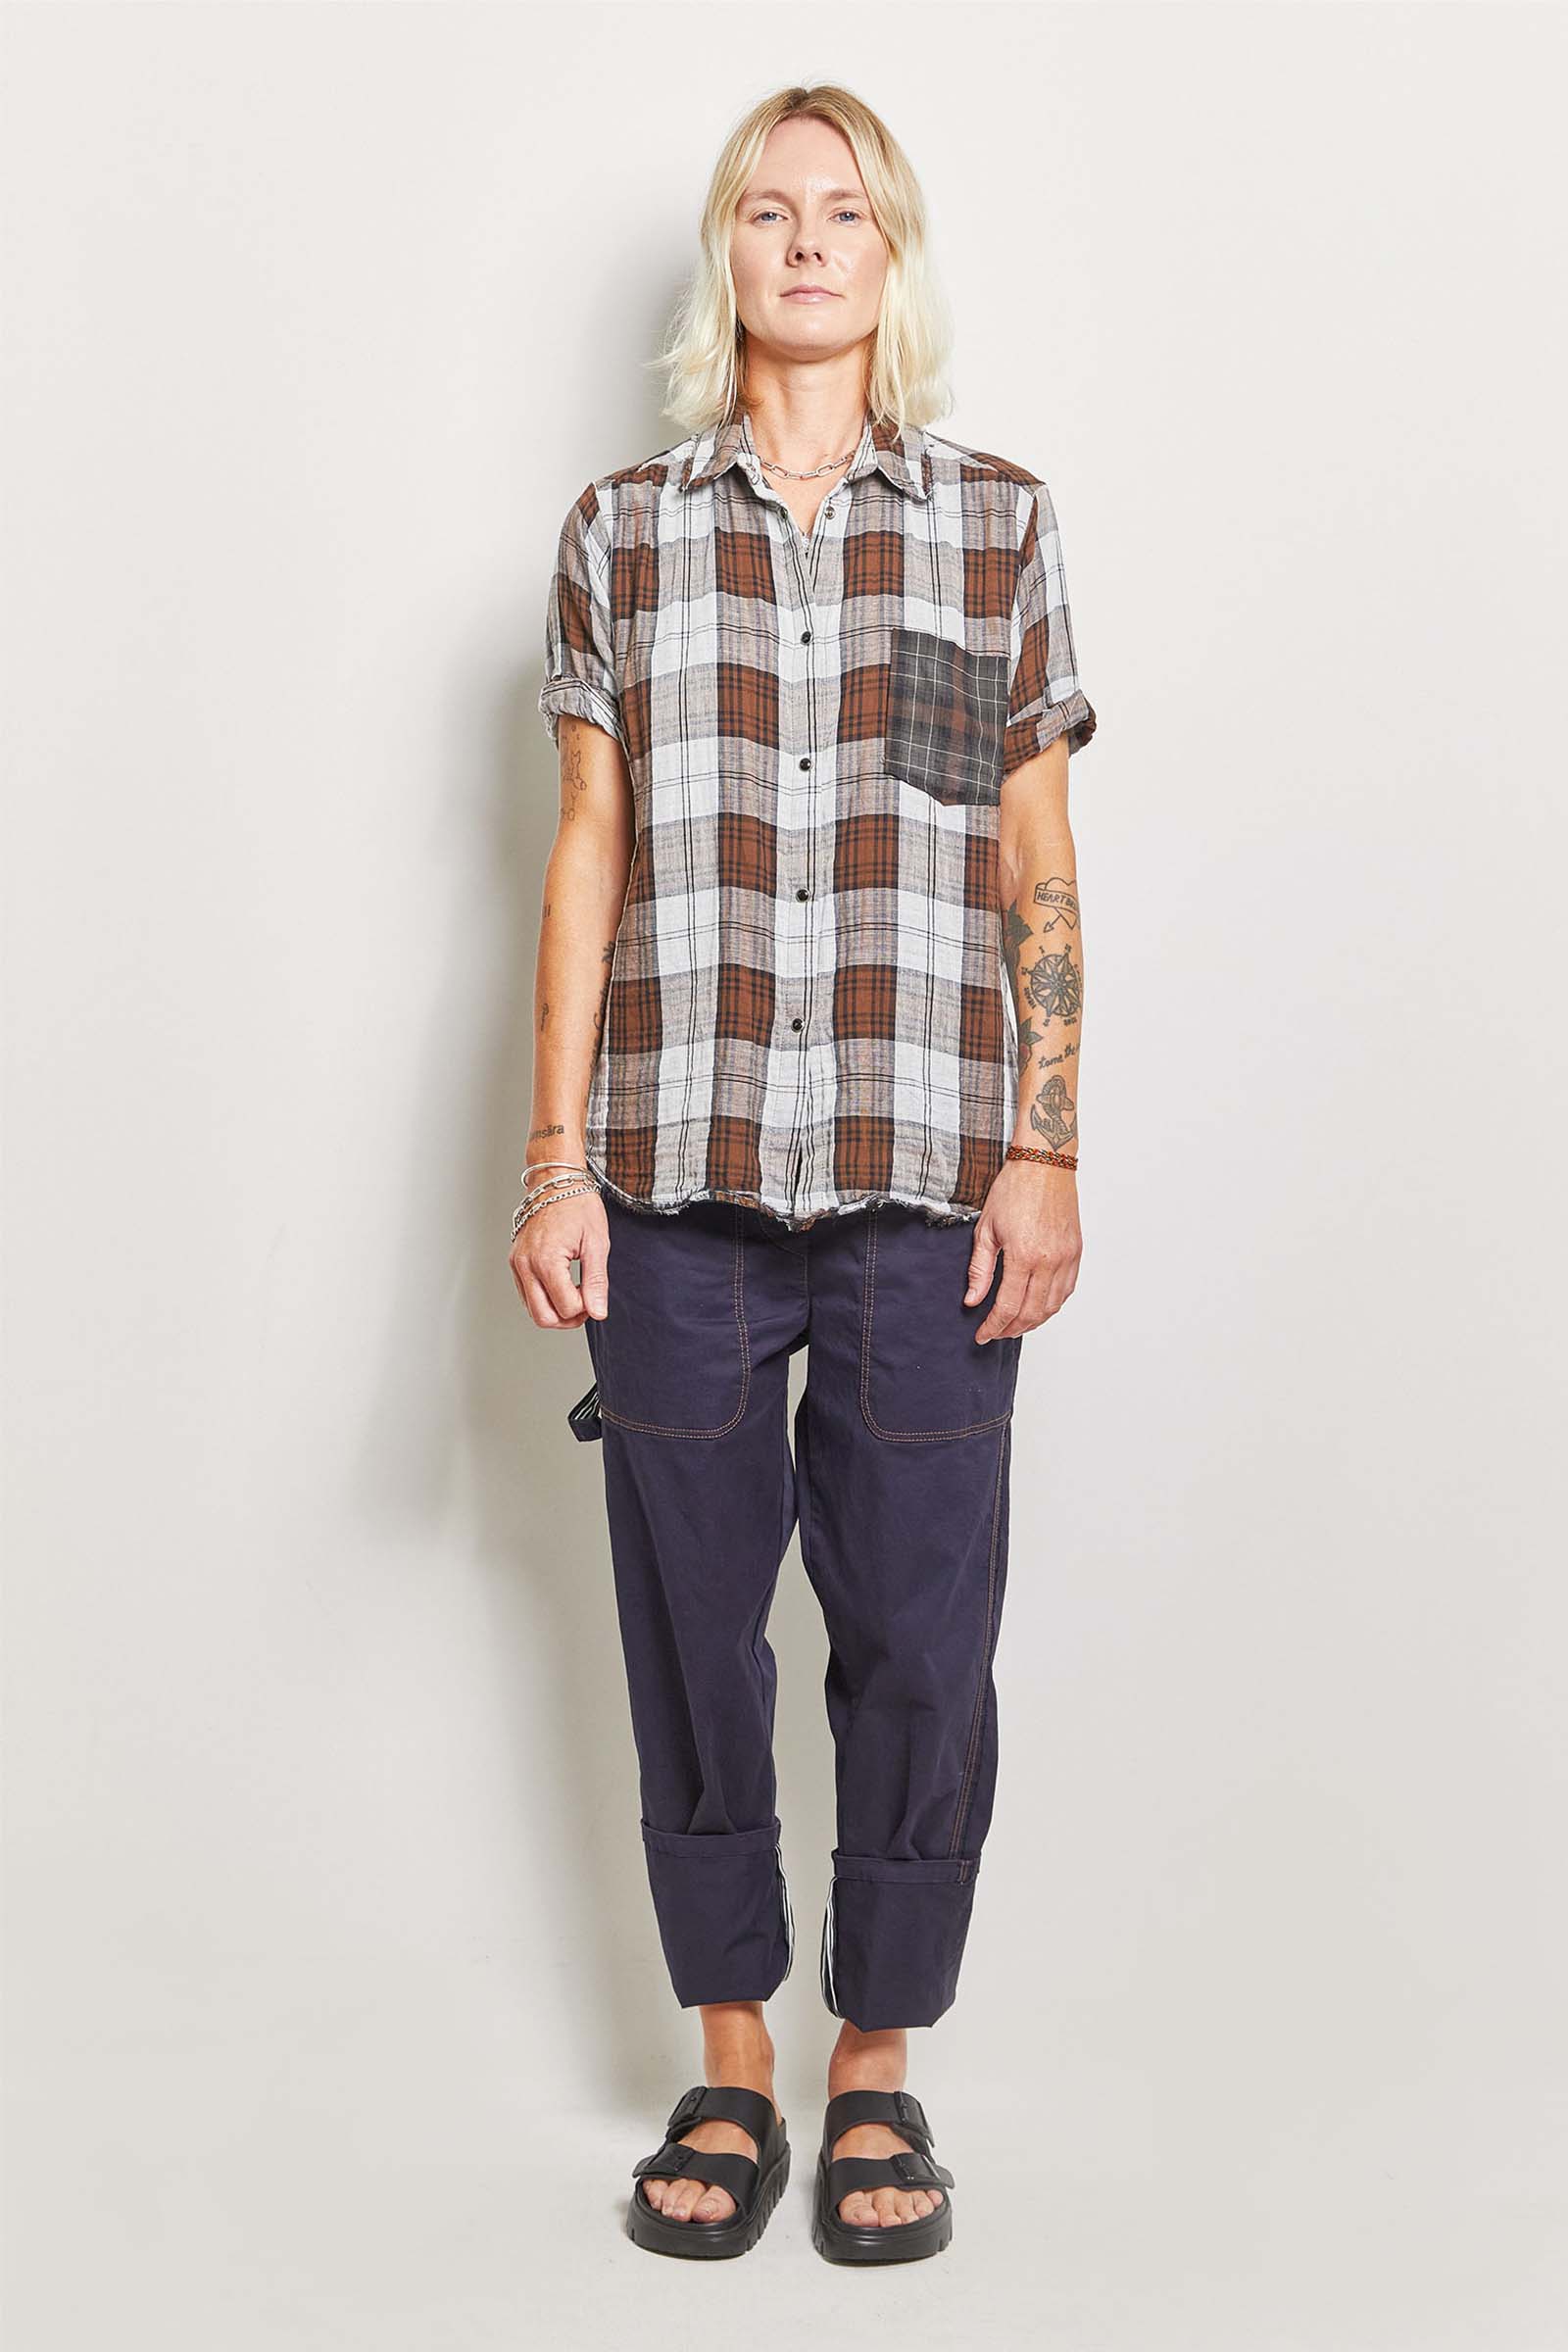 byfreer flannel cotton chocolate check band shirt.